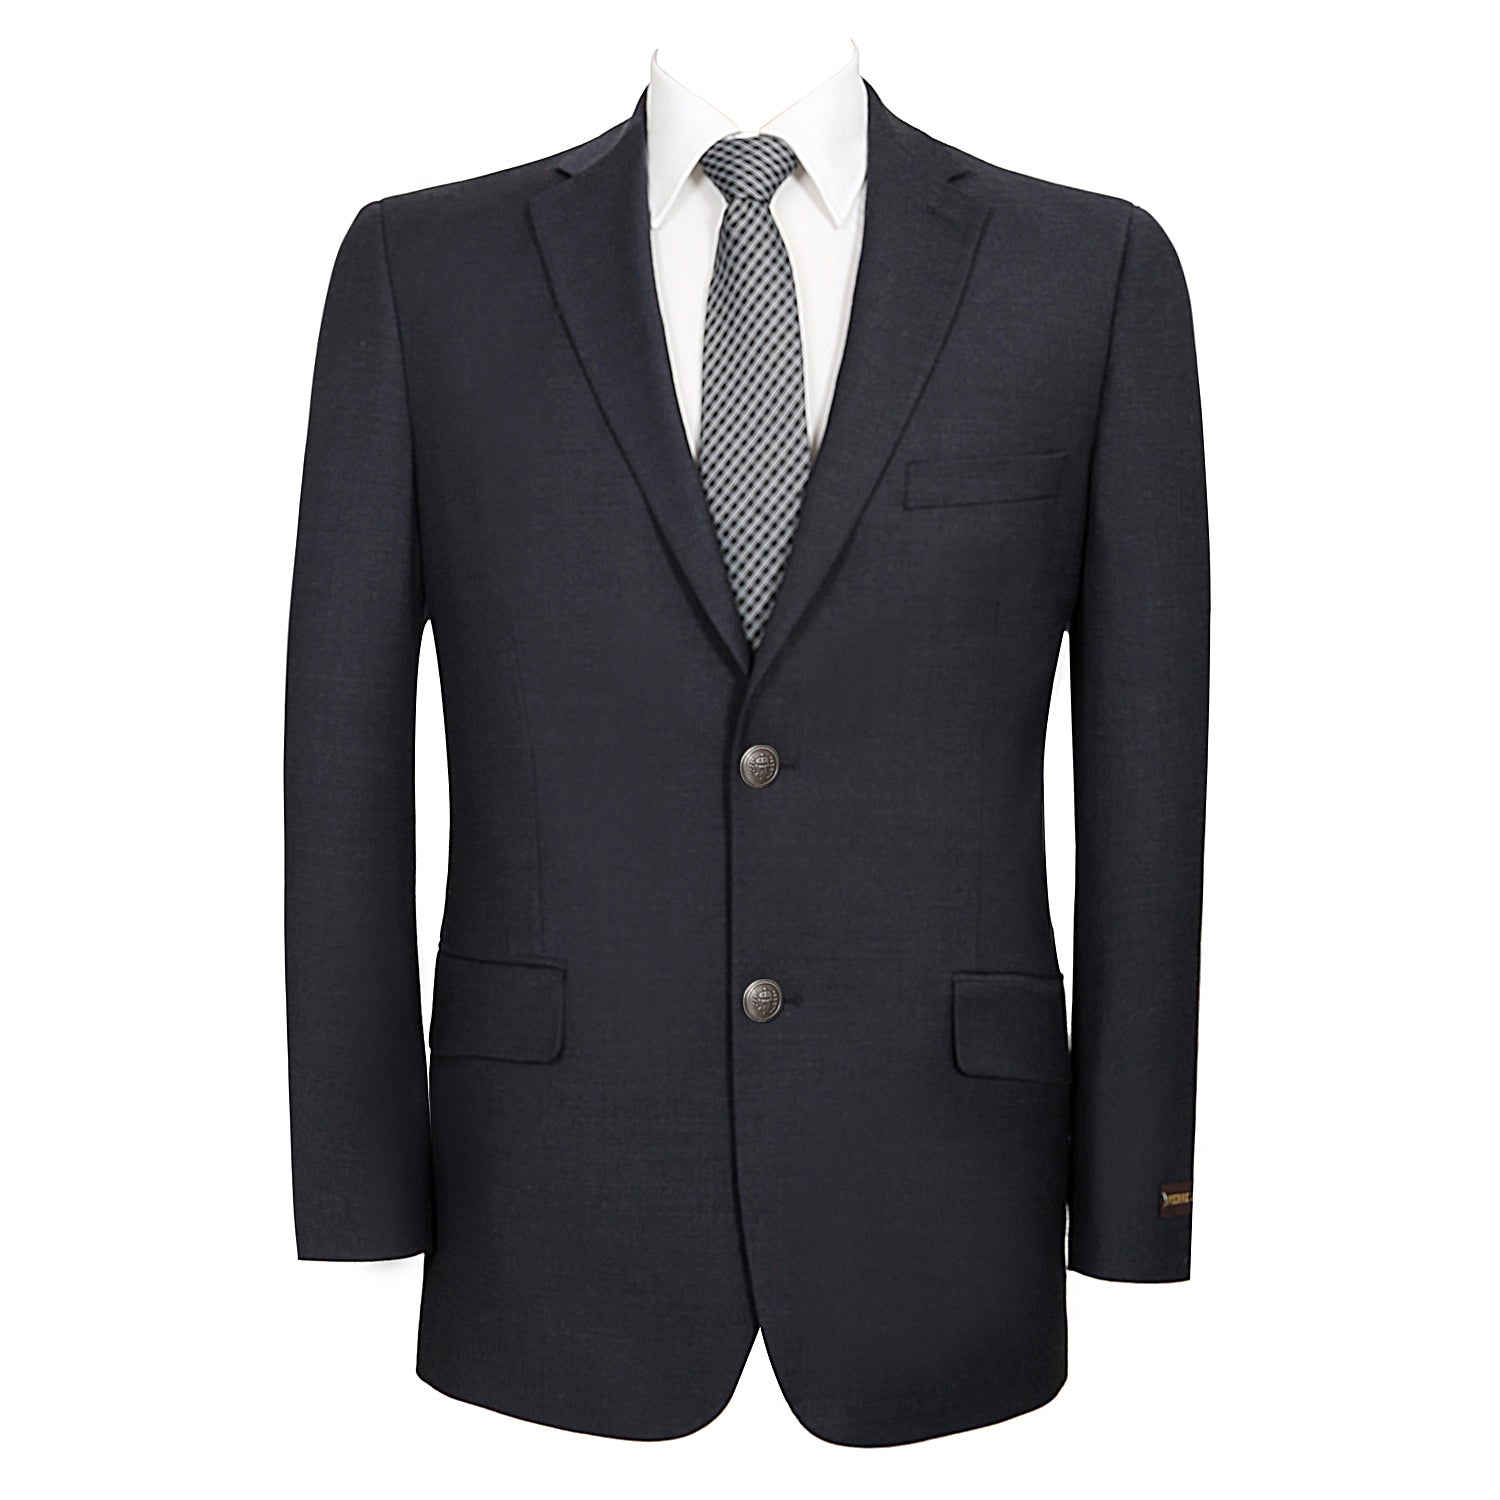 Men's Classic Fit 2 Button Wool and Polyester Blend Suit Jacket